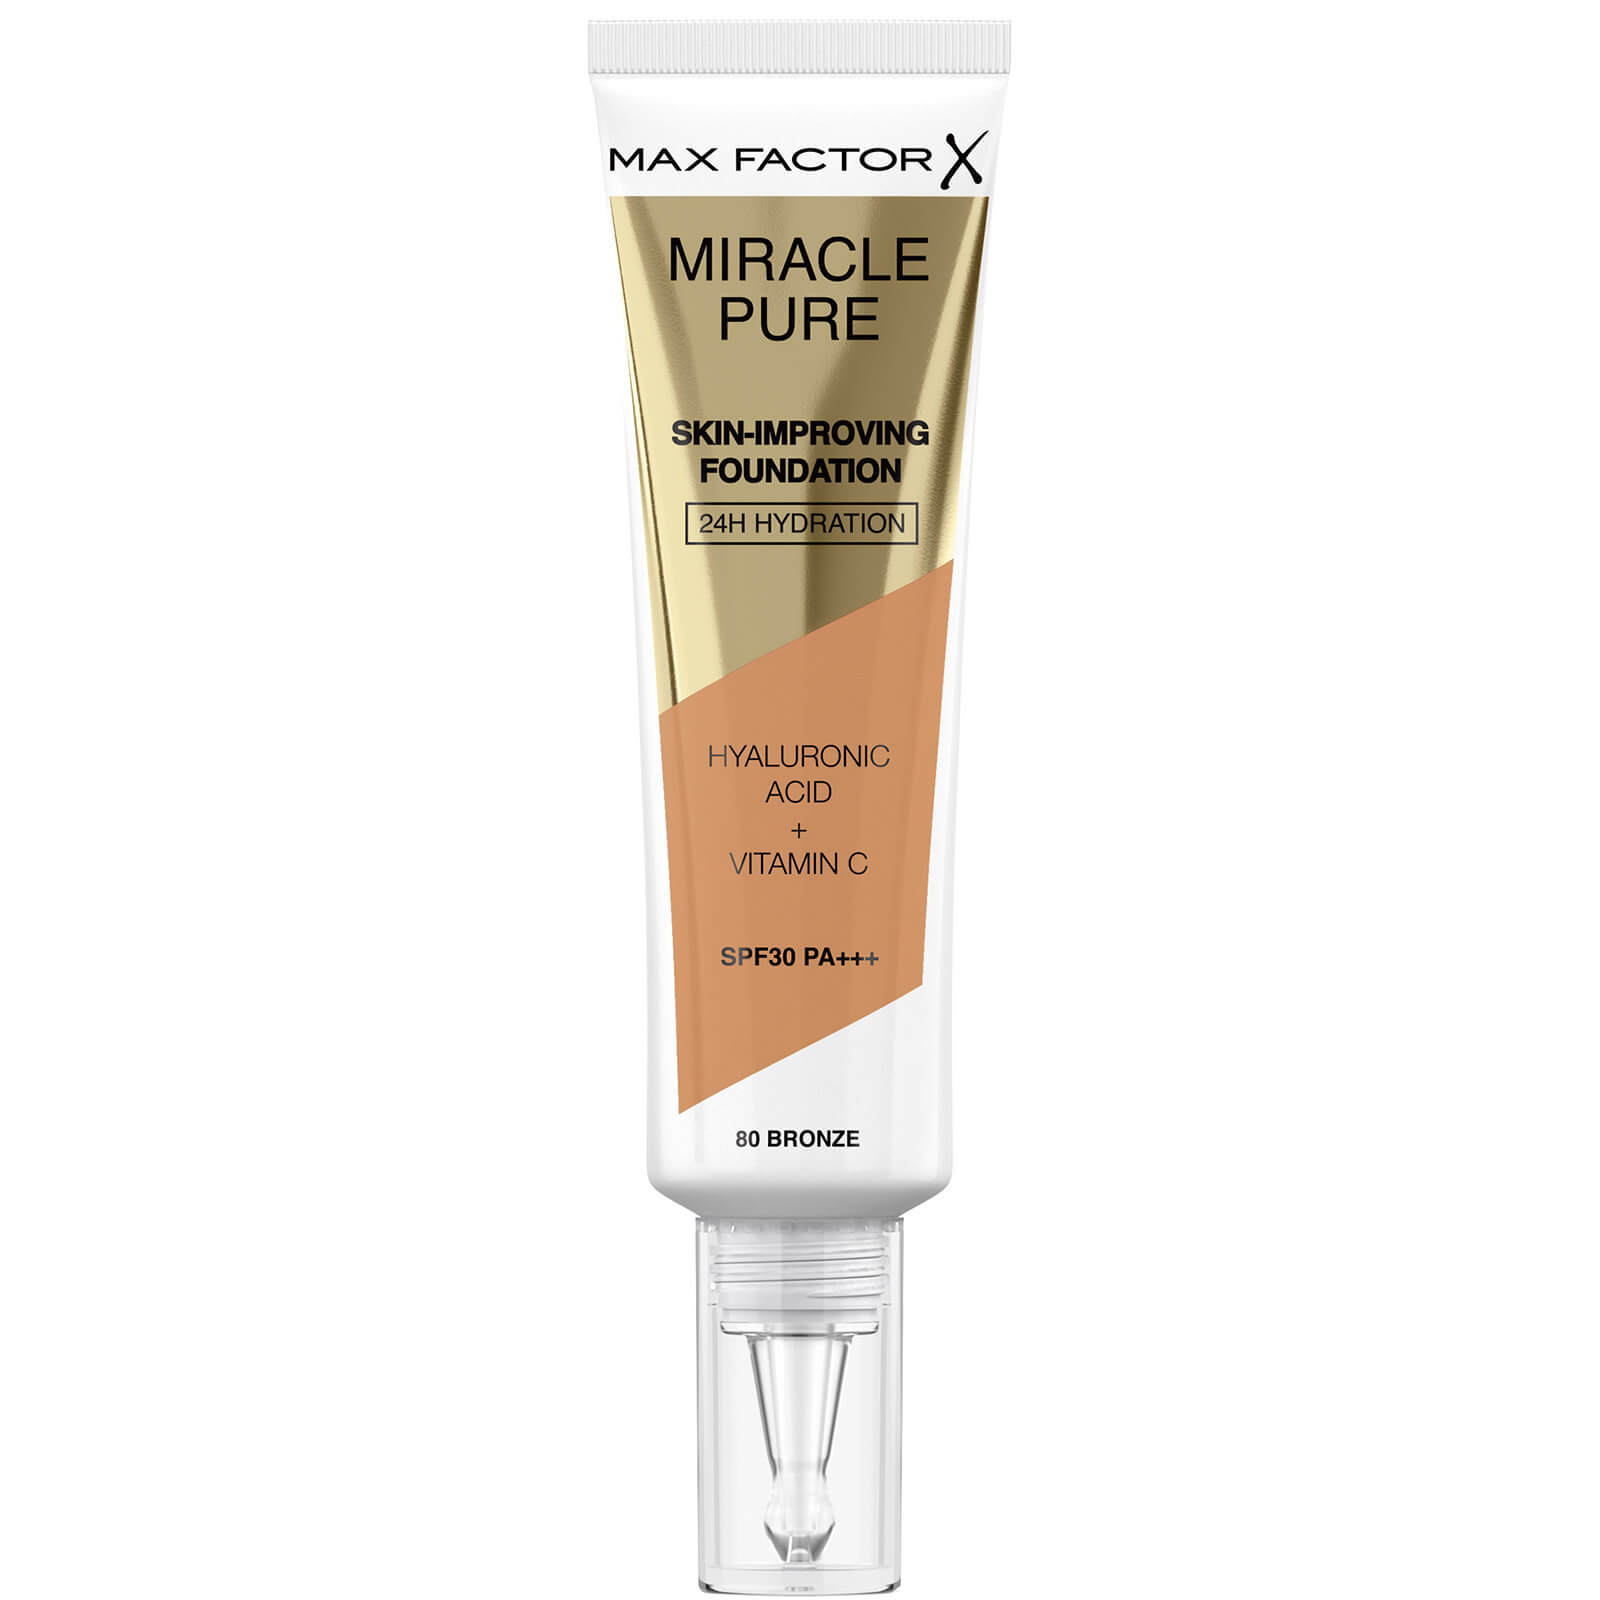 Max Factor Miracle Pure Skin Improving Foundation 30ml (Various Shades) - Bronze